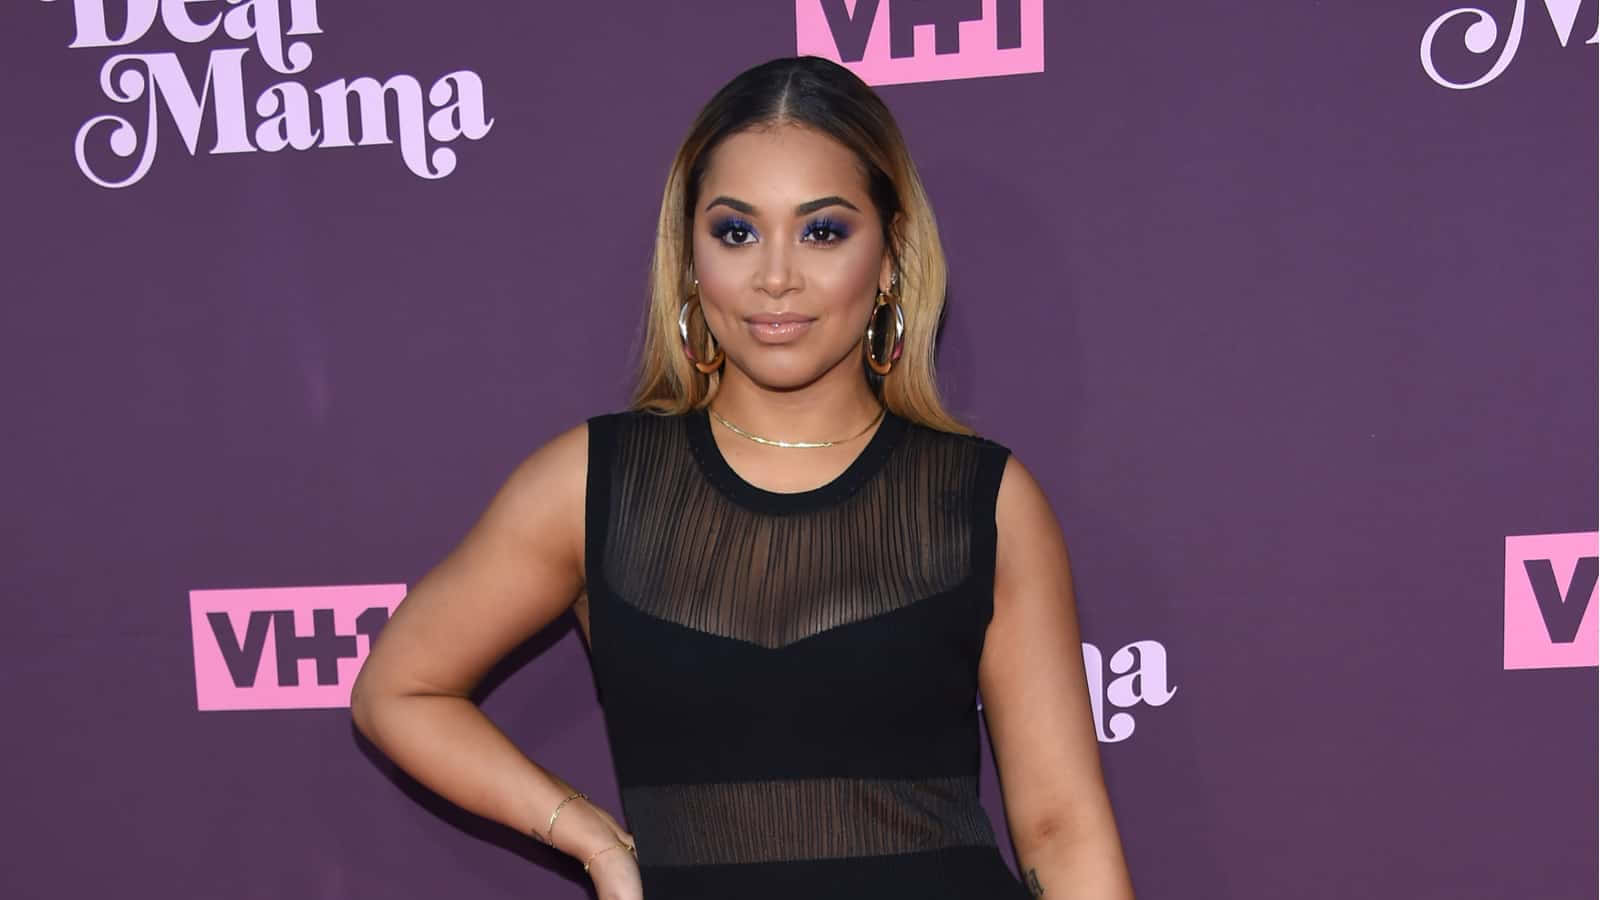 Lauren London Looking Stunning In A Stylish Outfit Background